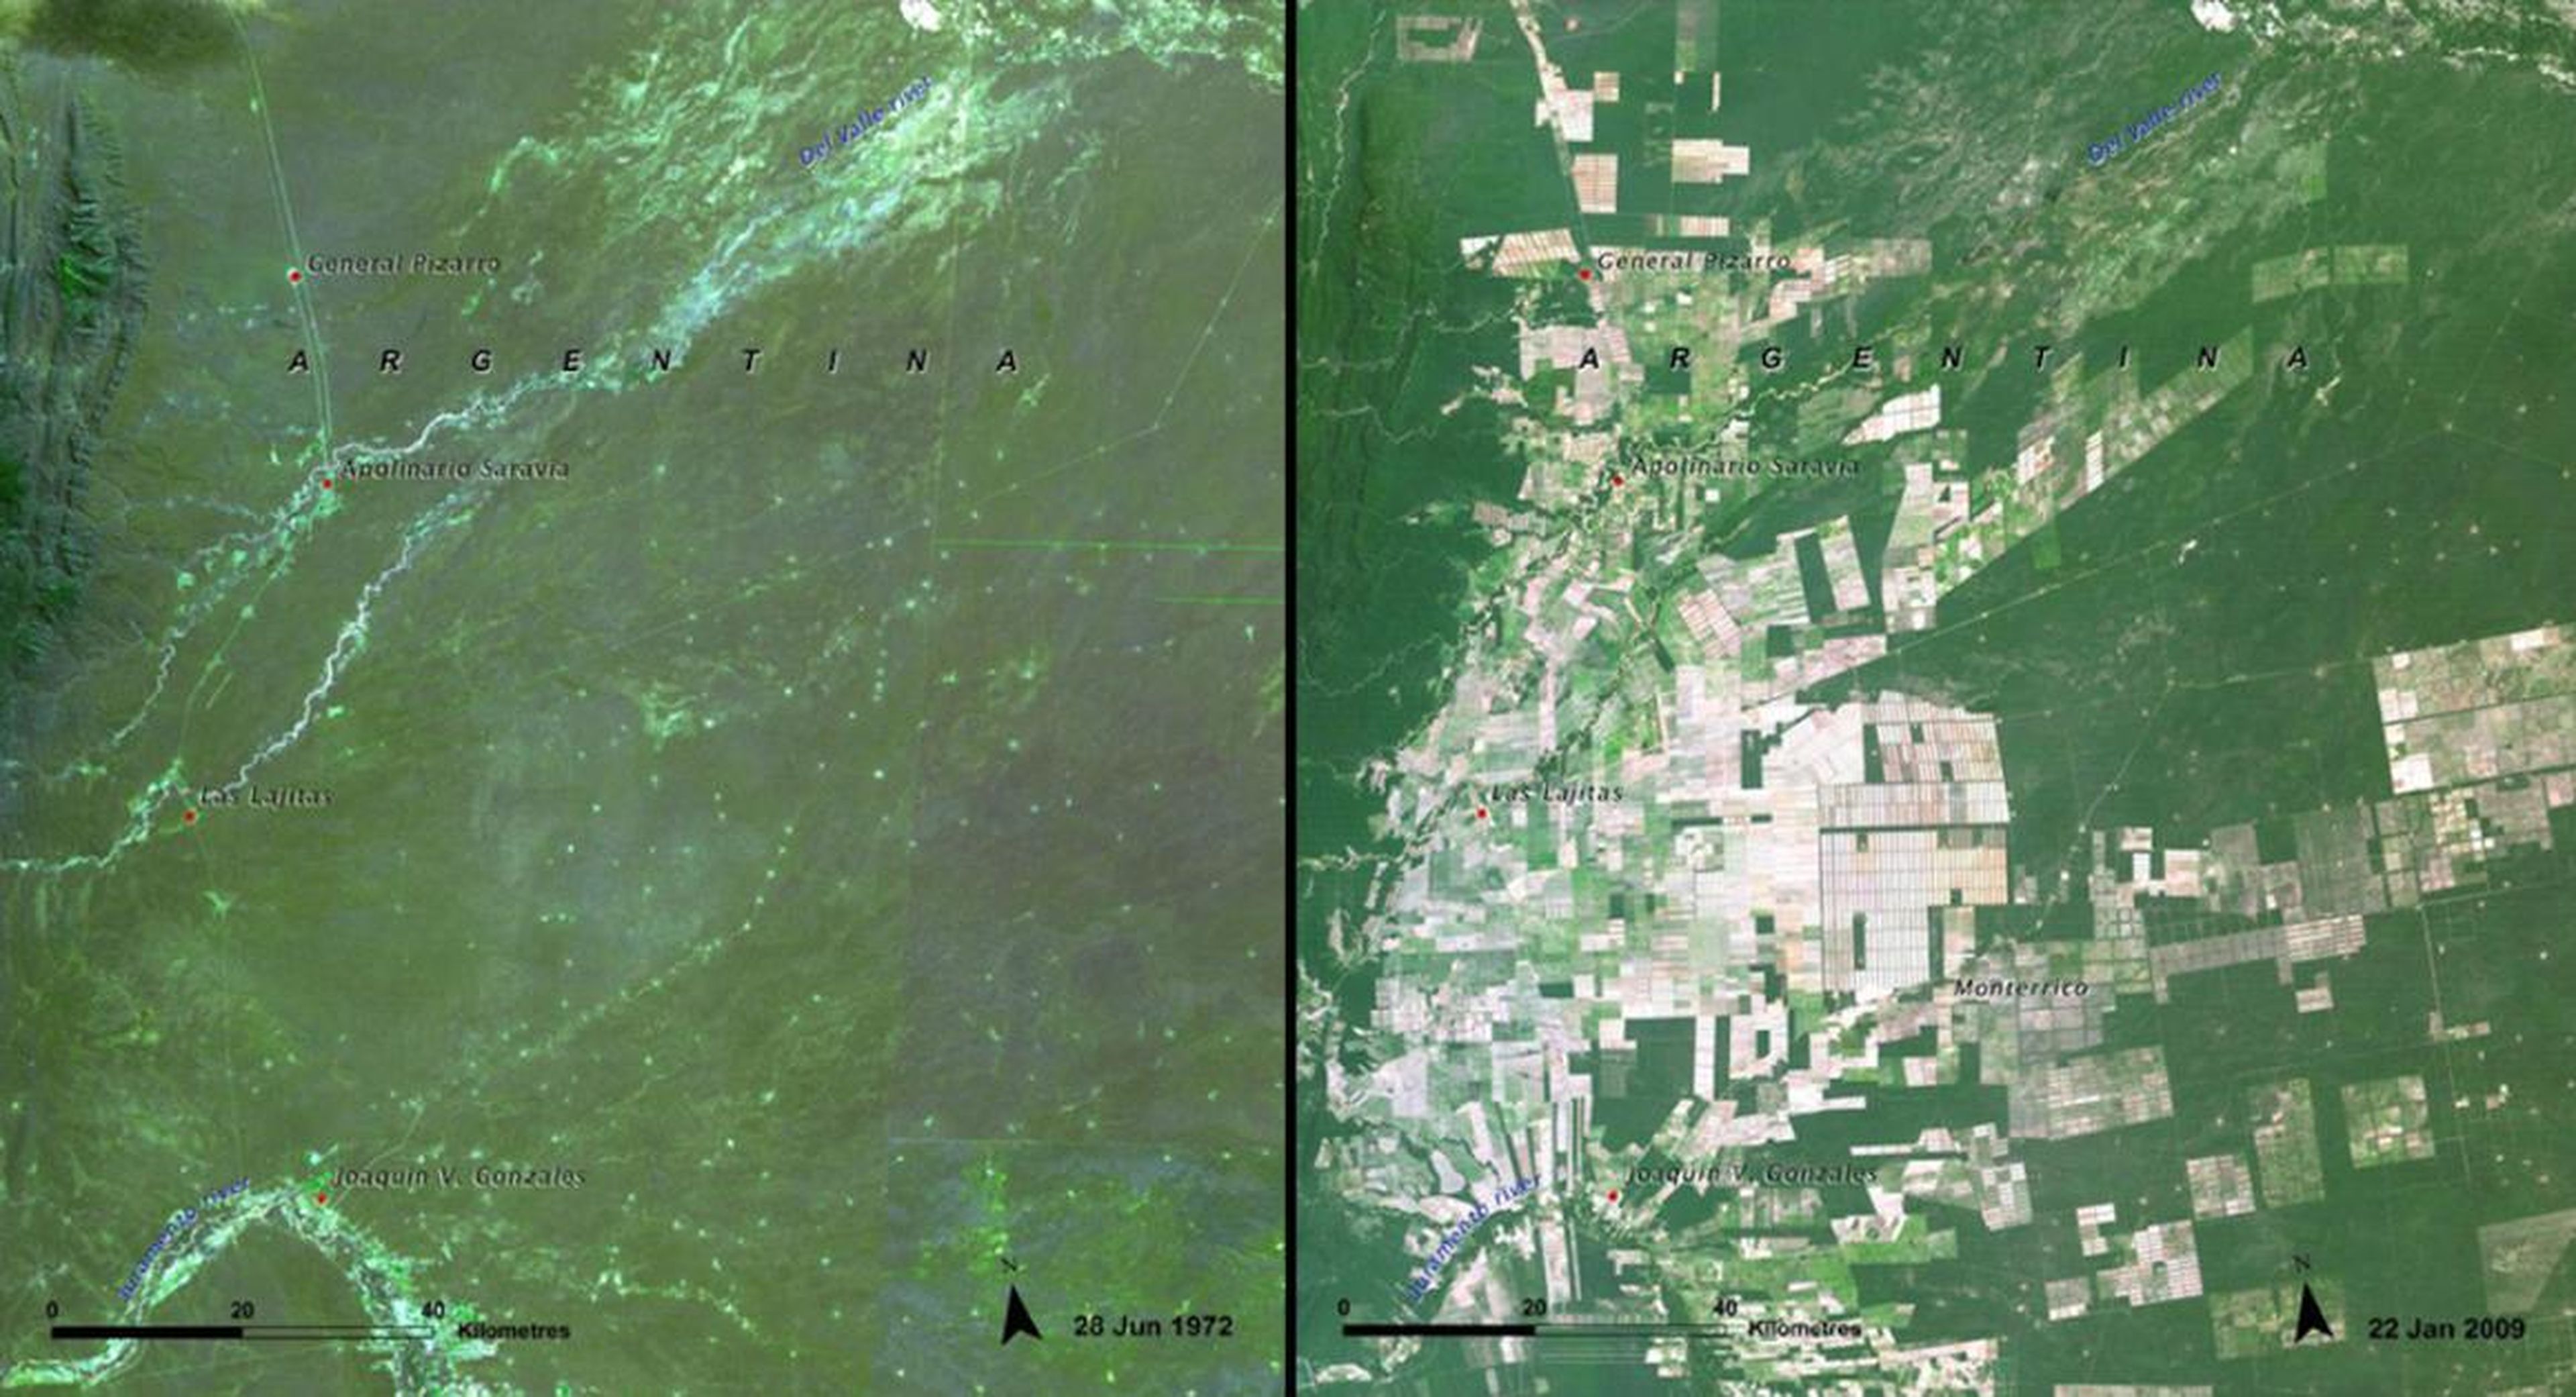 Huge swaths of the Salta Forest in Argentina disappeared from 1972 (left) to 2009 (right).